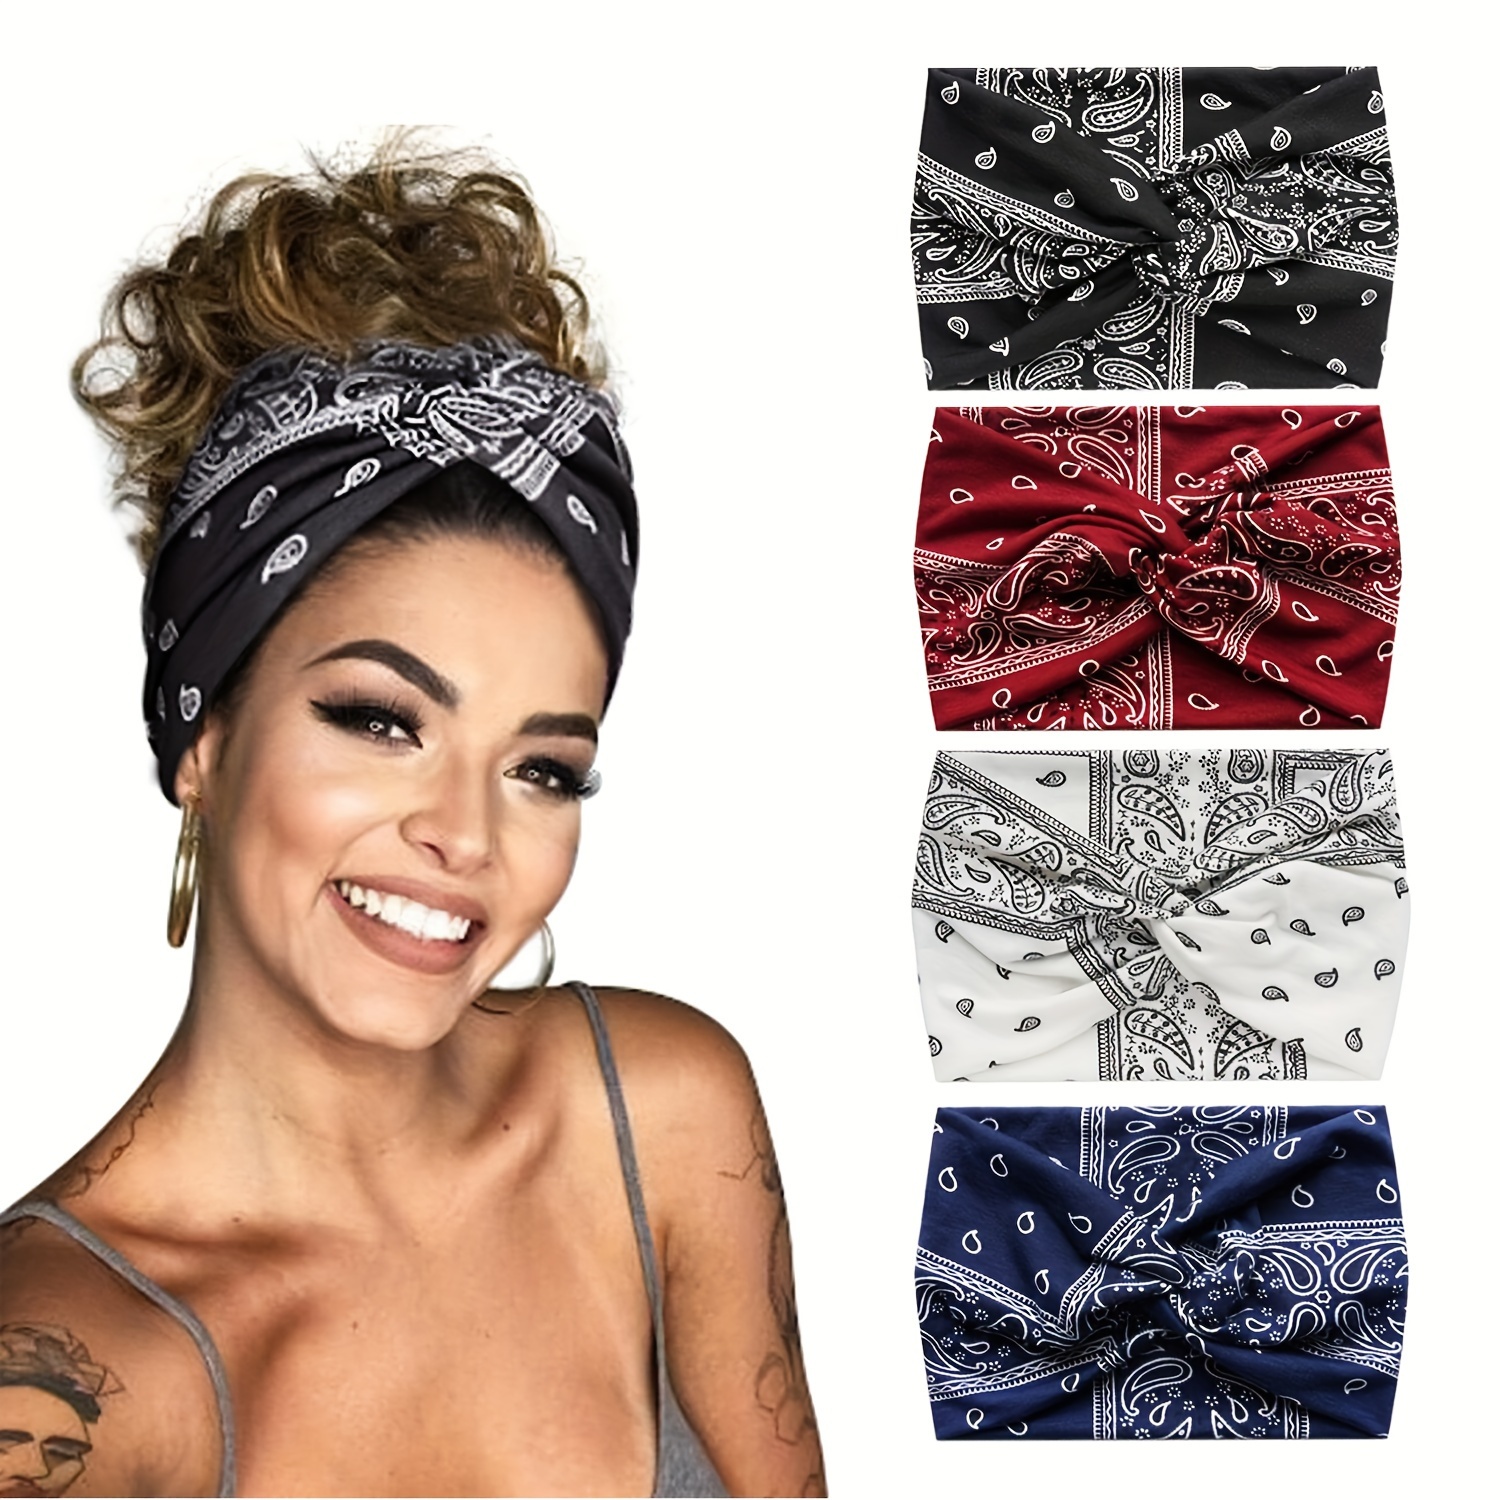 

4pcs Vintage Printed Wide Brimmed Head Bands Elastic Knotted Hair Hoops Trendy Hair Accessories For Women And Girls